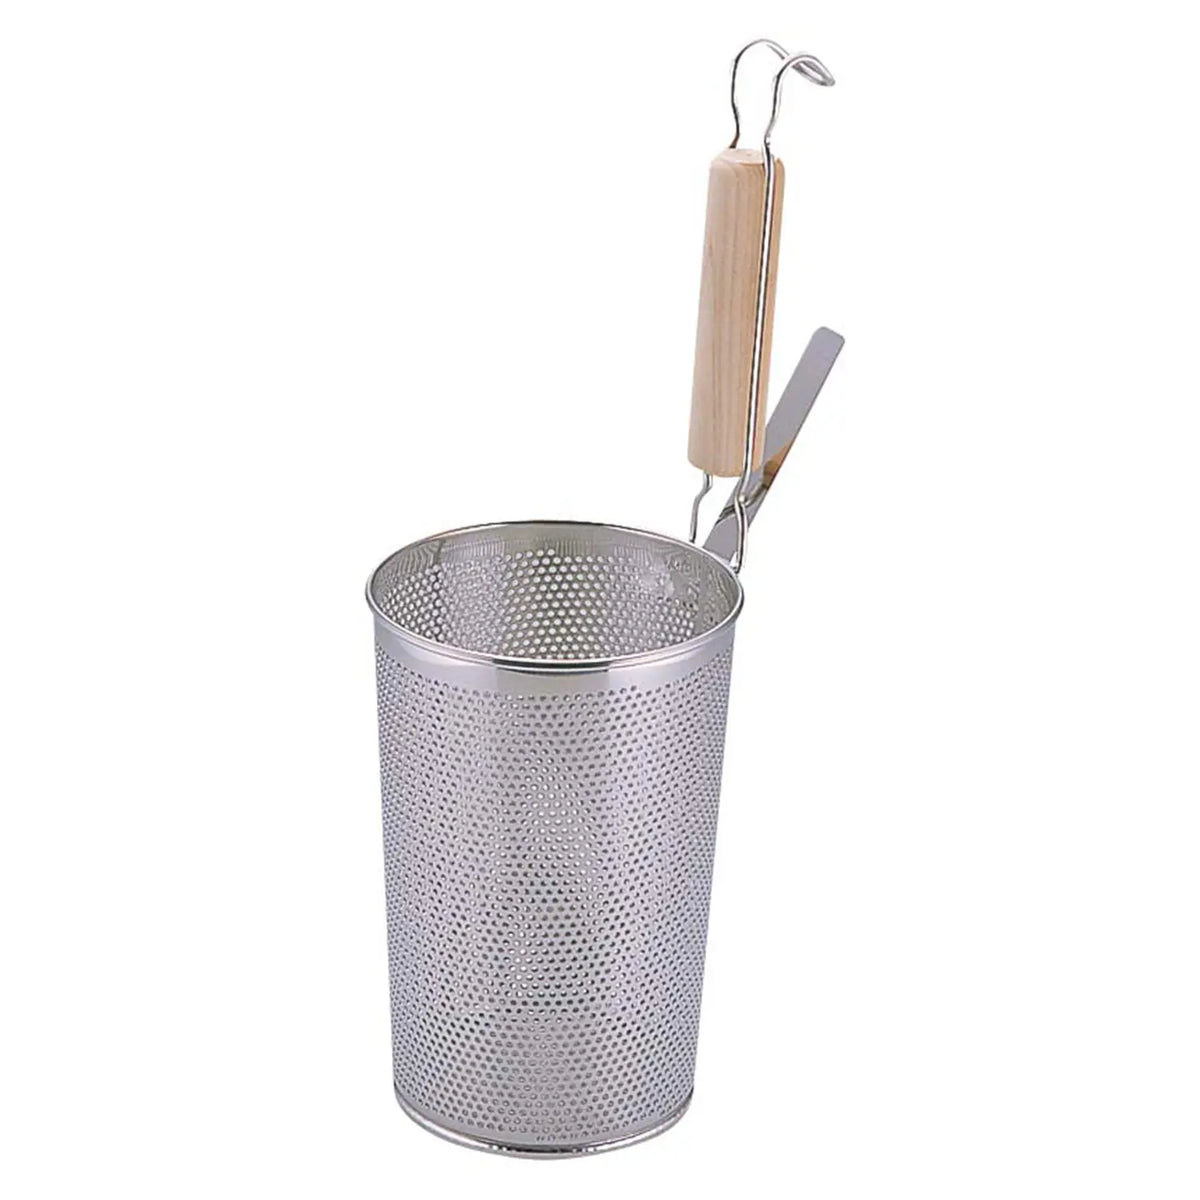 YUKIWA Stainless Steel Perforated Deep Tebo Noodle Strainer Flat Base with Wooden Handle